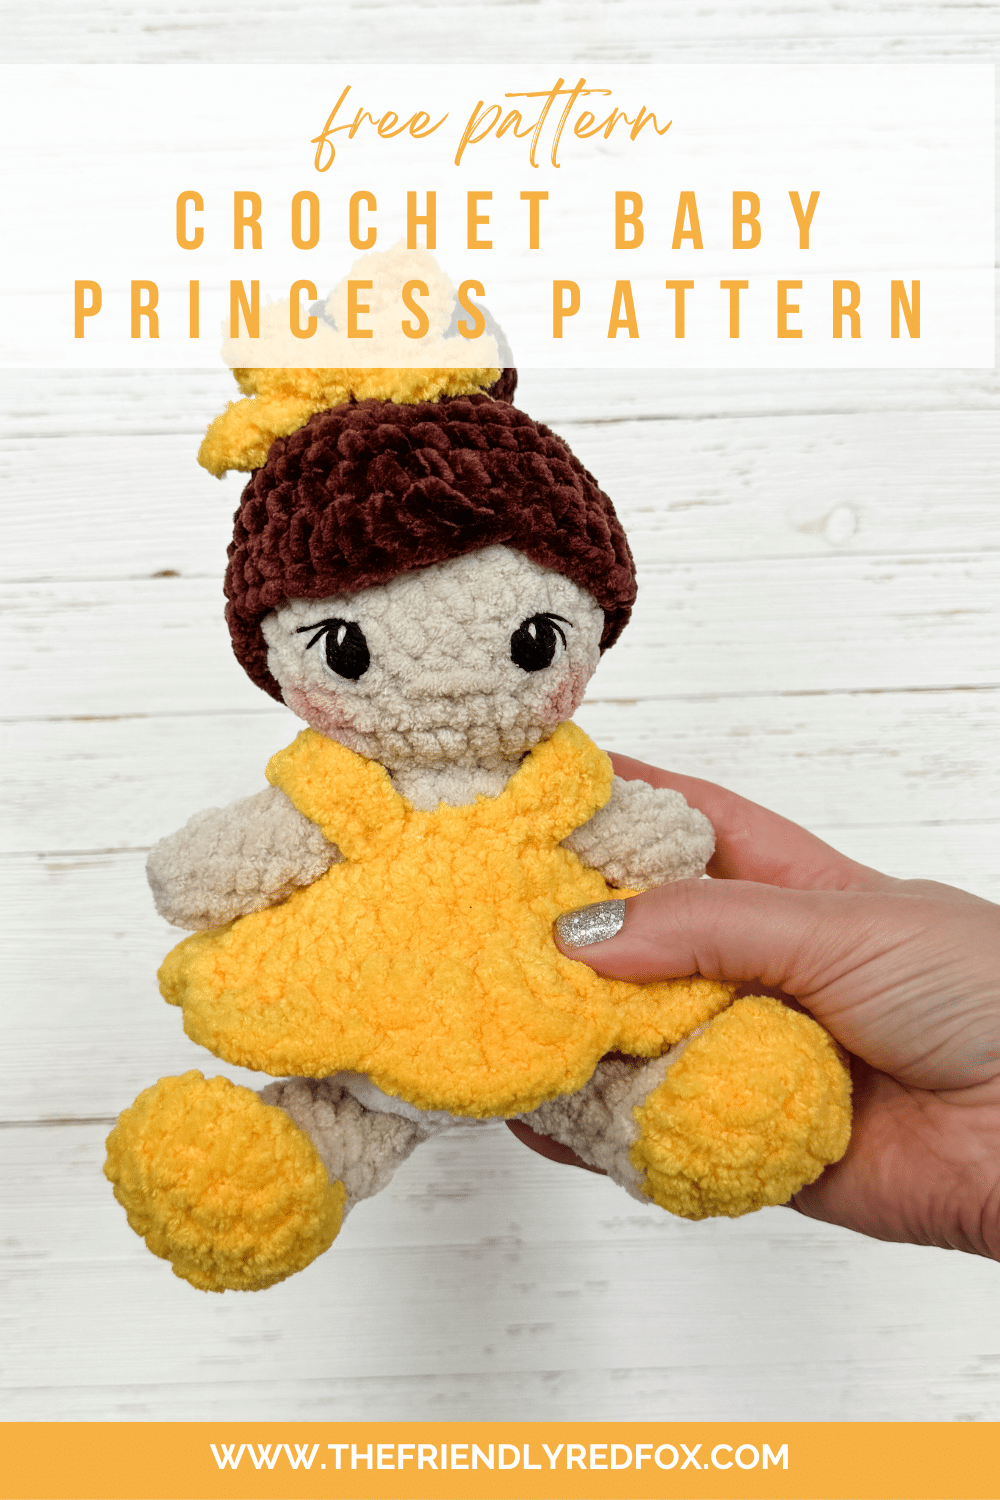 This free baby princess crochet pattern amigurumi pattern makes a squishy plush pal! This works up quickly with plush yarn.